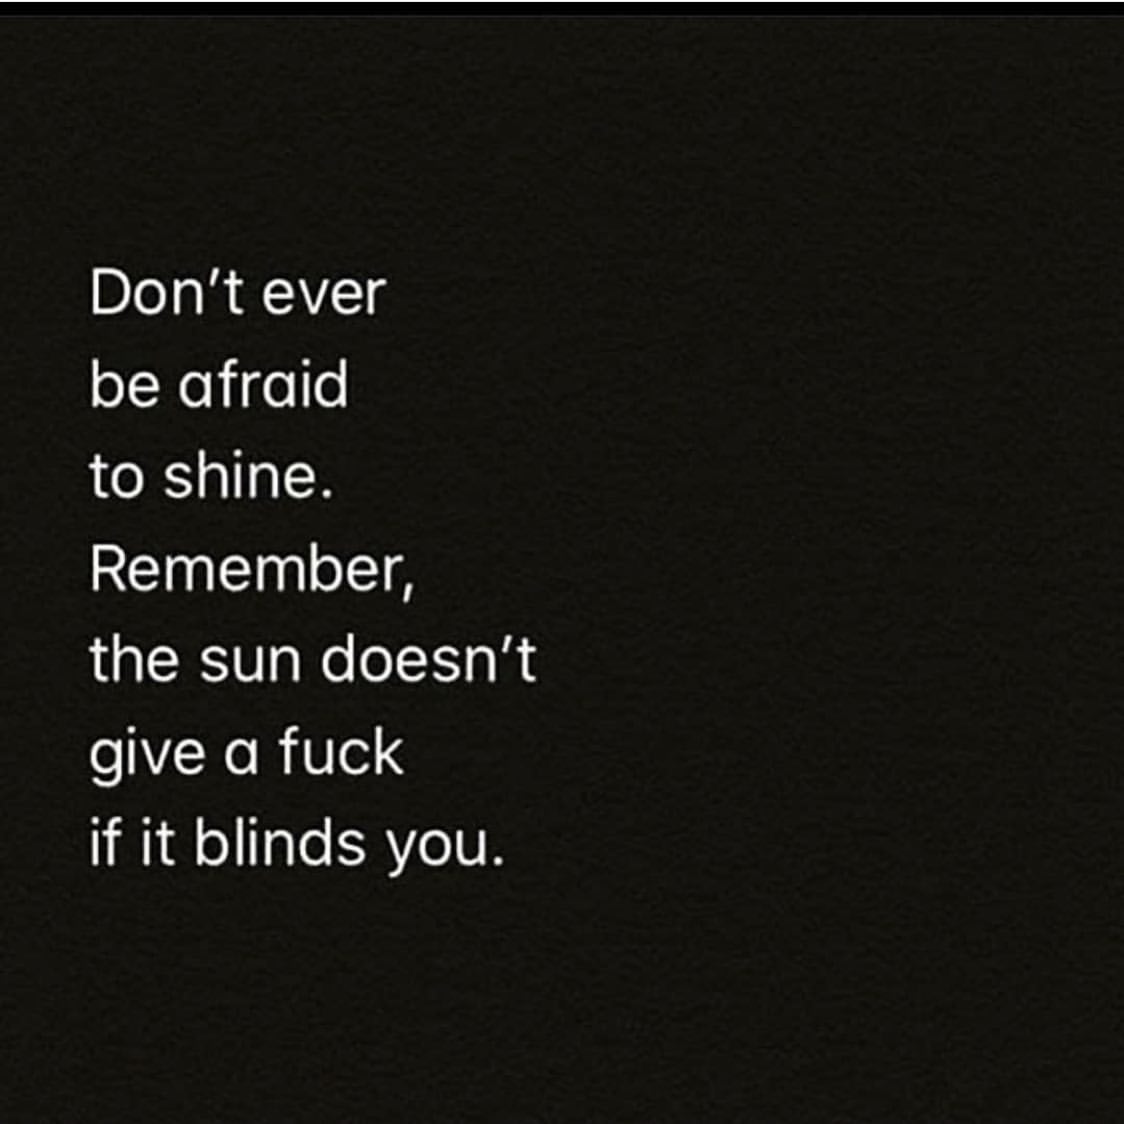 Don't ever be afraid to shine. Remember, the sun doesn't give a fuck if it blinds you.